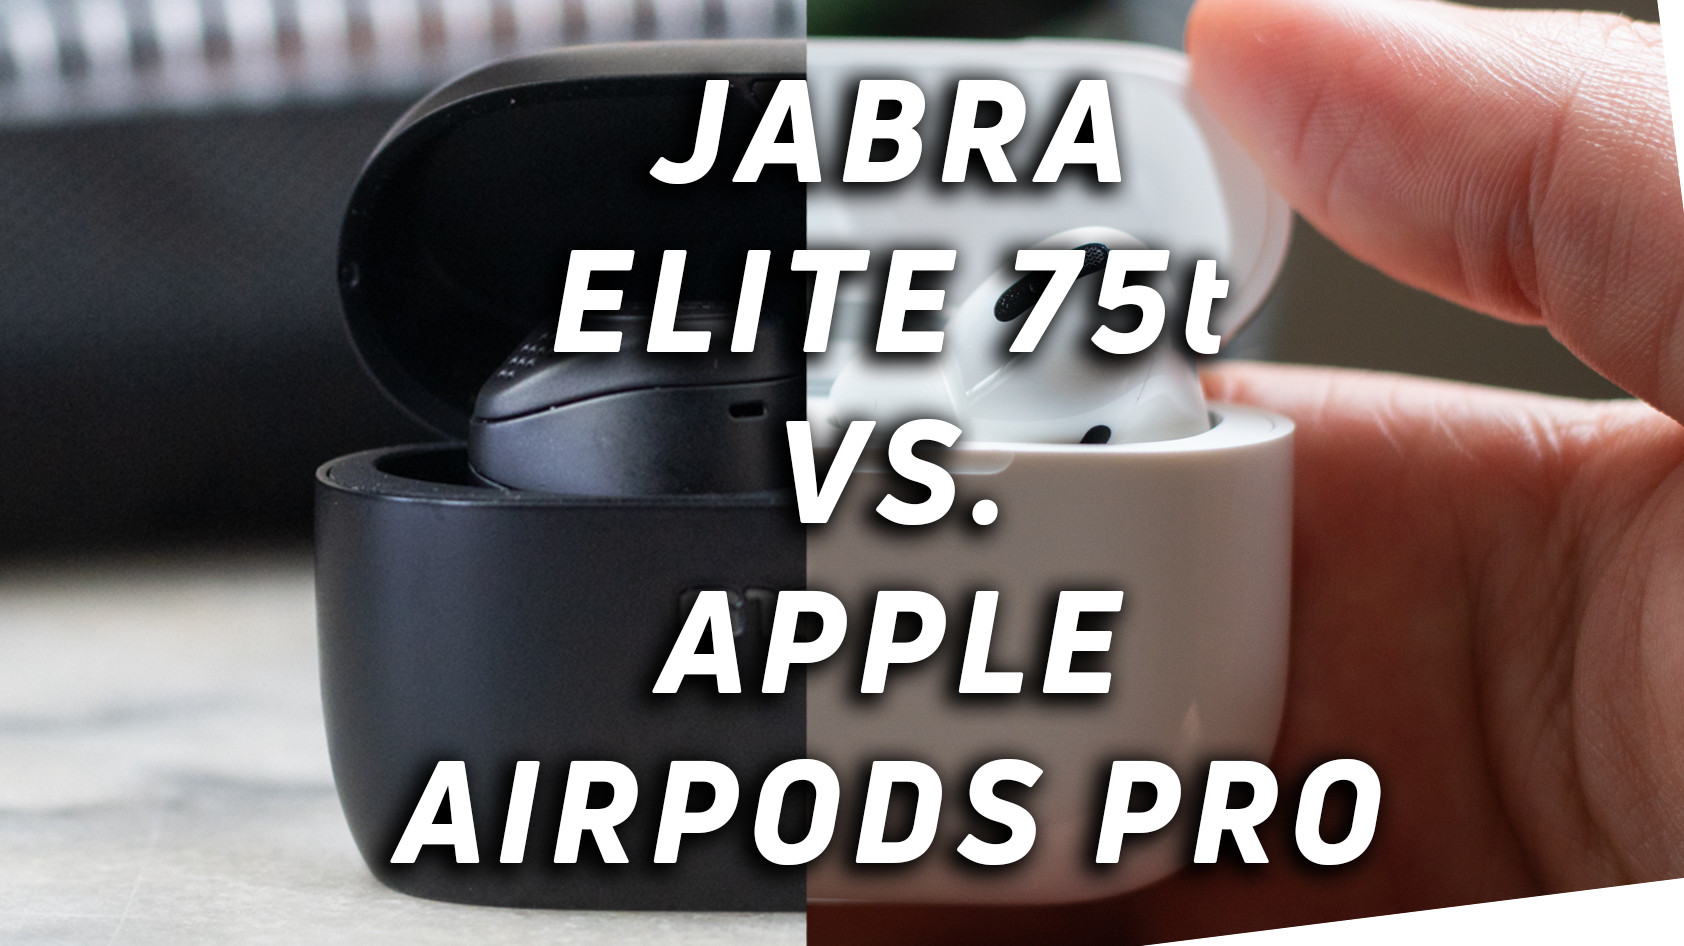 The Jabra Elite 75t and Apple AirPods Pro combined into one image with versus text overlaid.